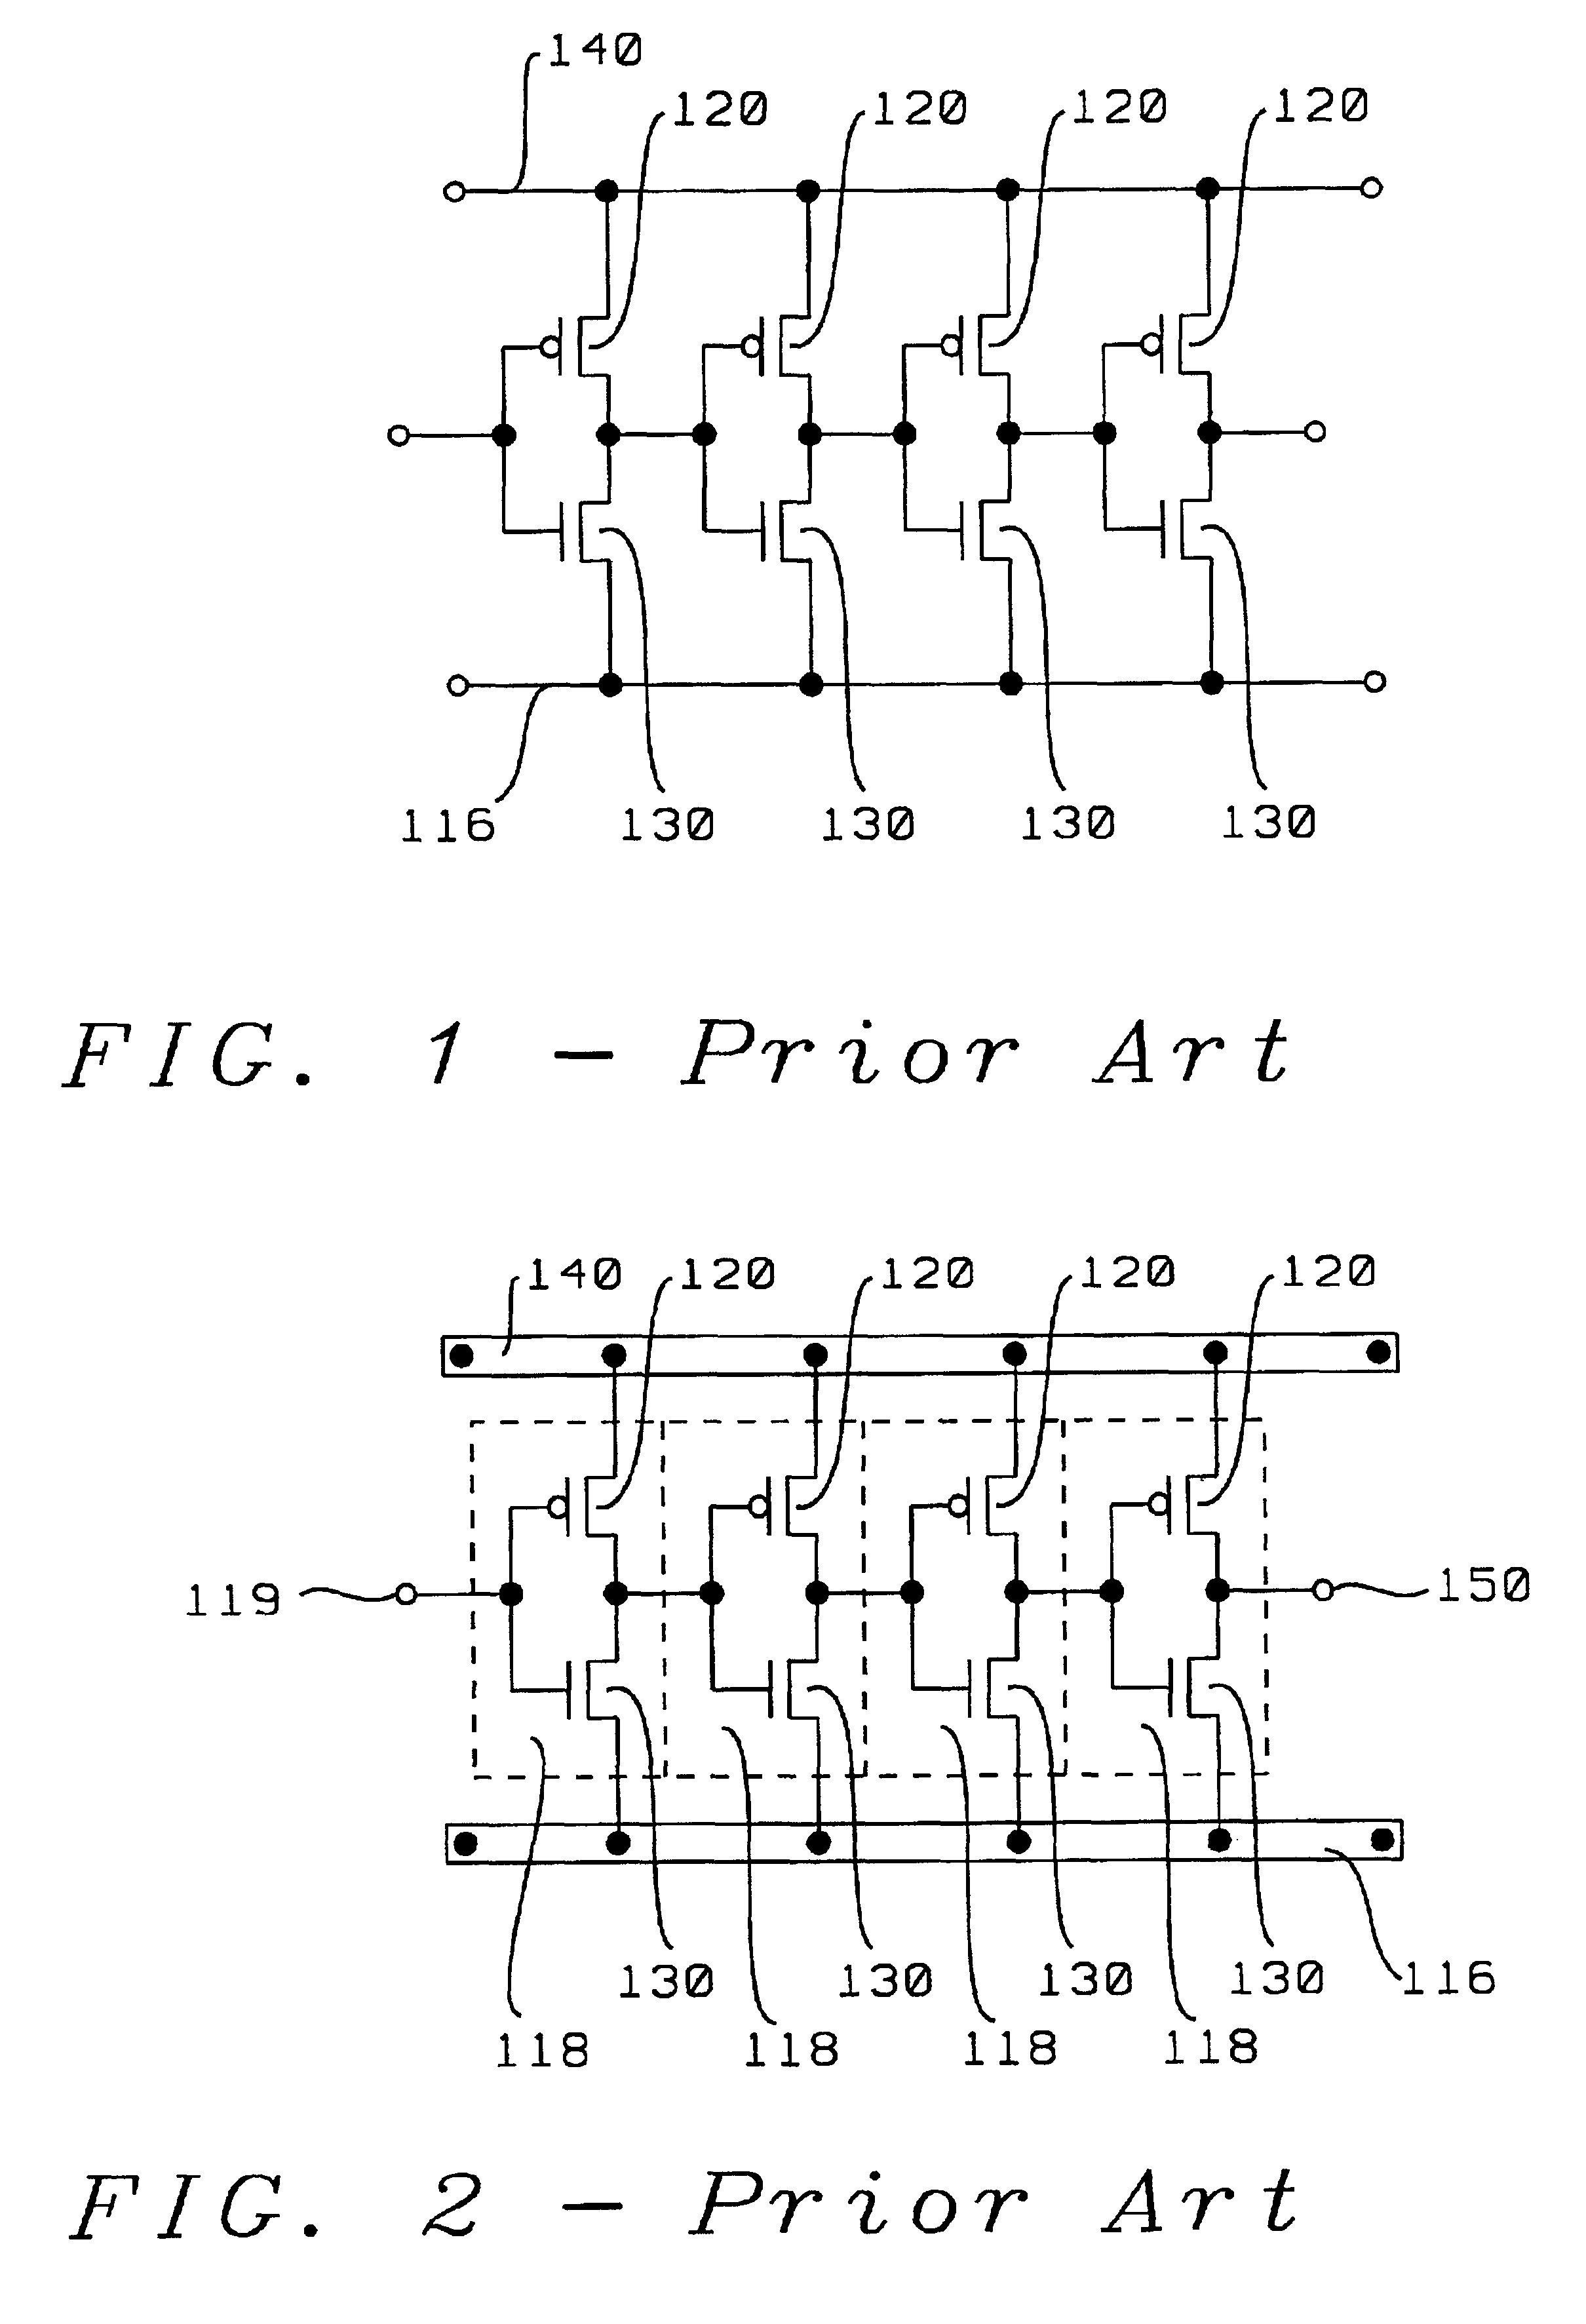 Structure of integrated circuit standard cell library for reducing power supply voltage fluctuation